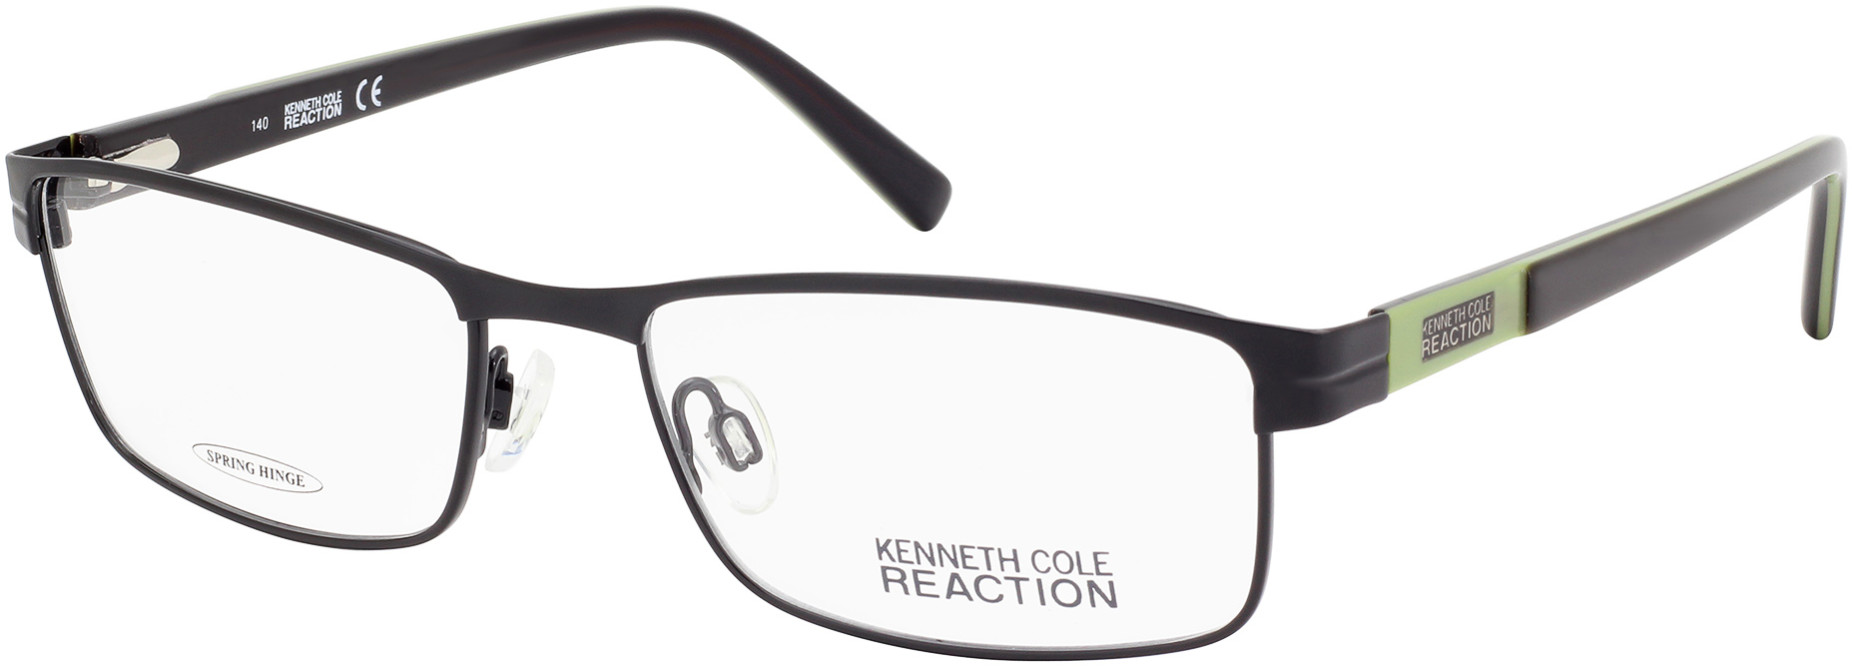 KENNETH COLE NY 0752 002